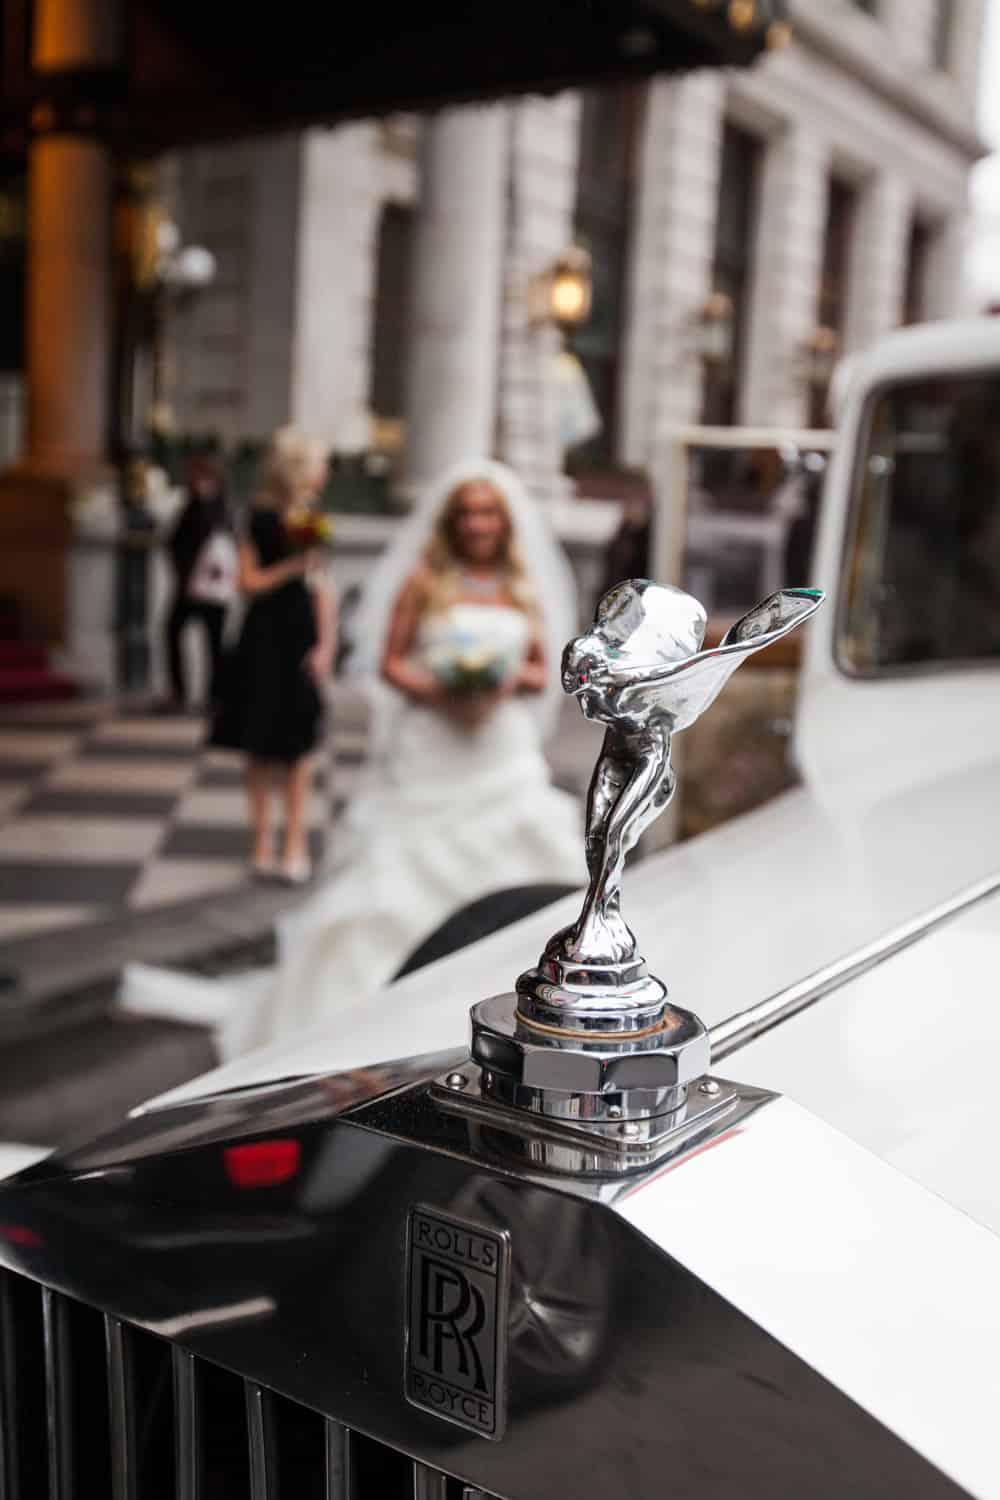 Rolls Royce car mascot with bride in background